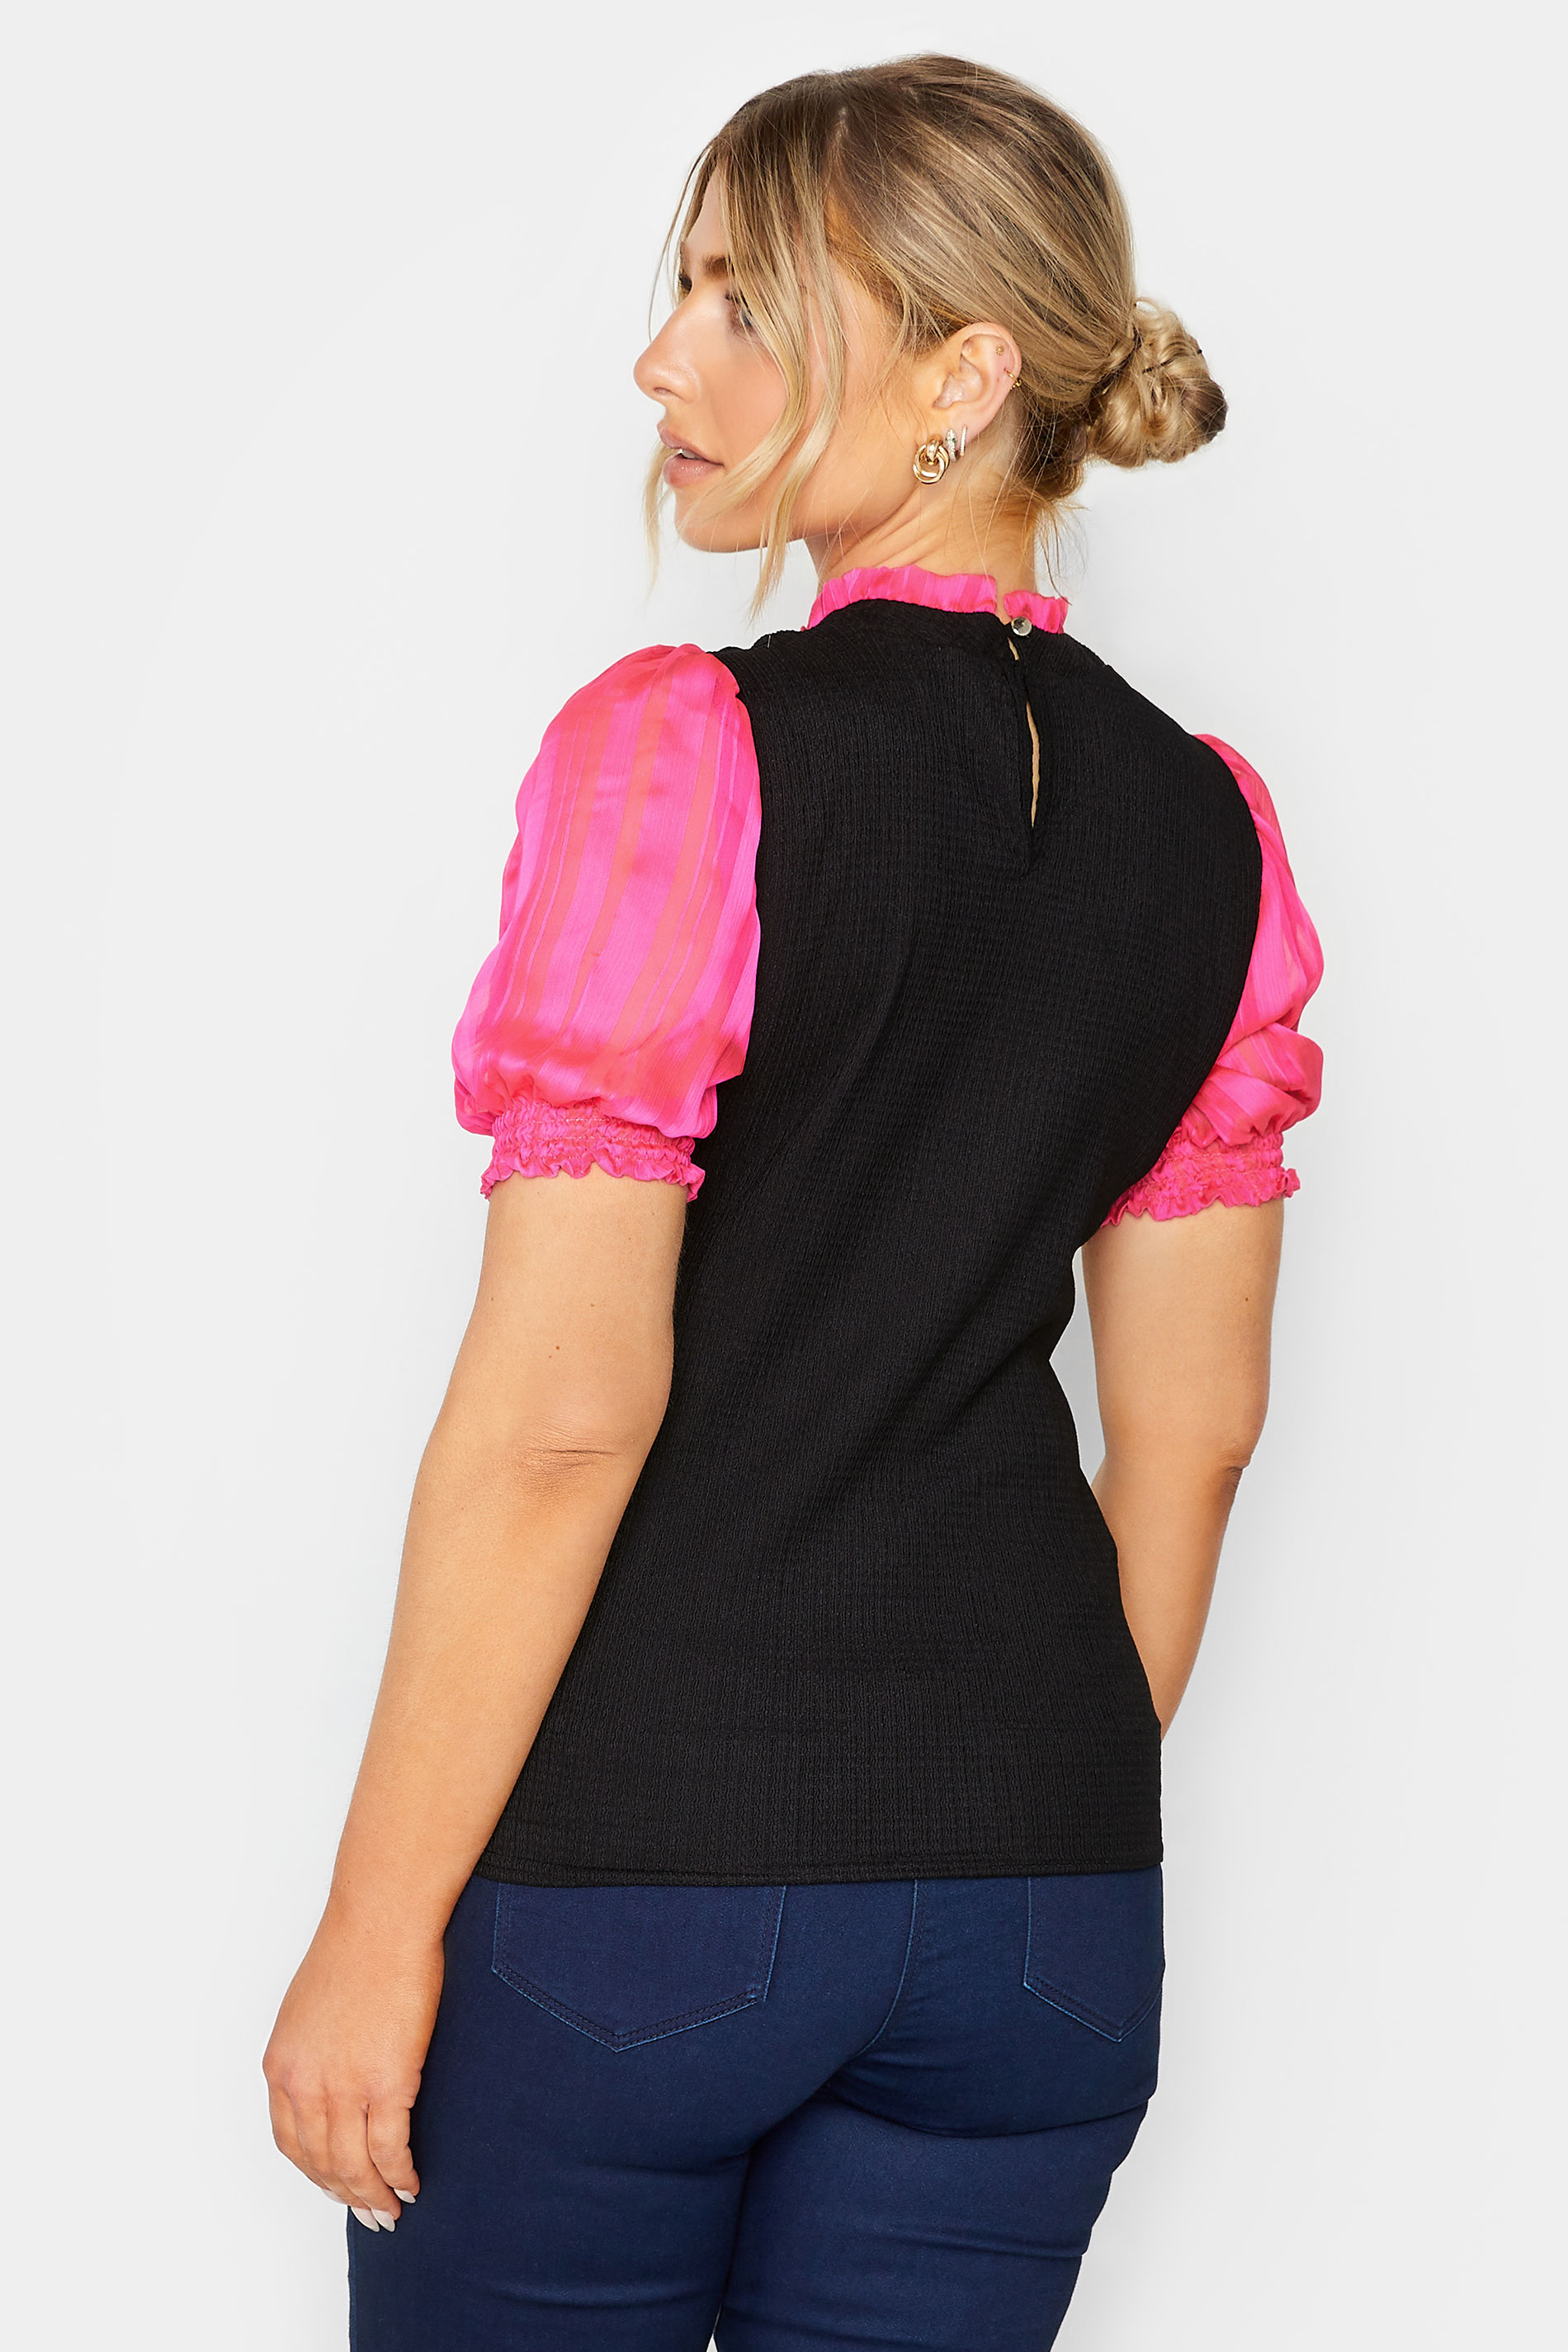 M&Co Black & Pink Contrast Sleeve Blouse | M&Co 3